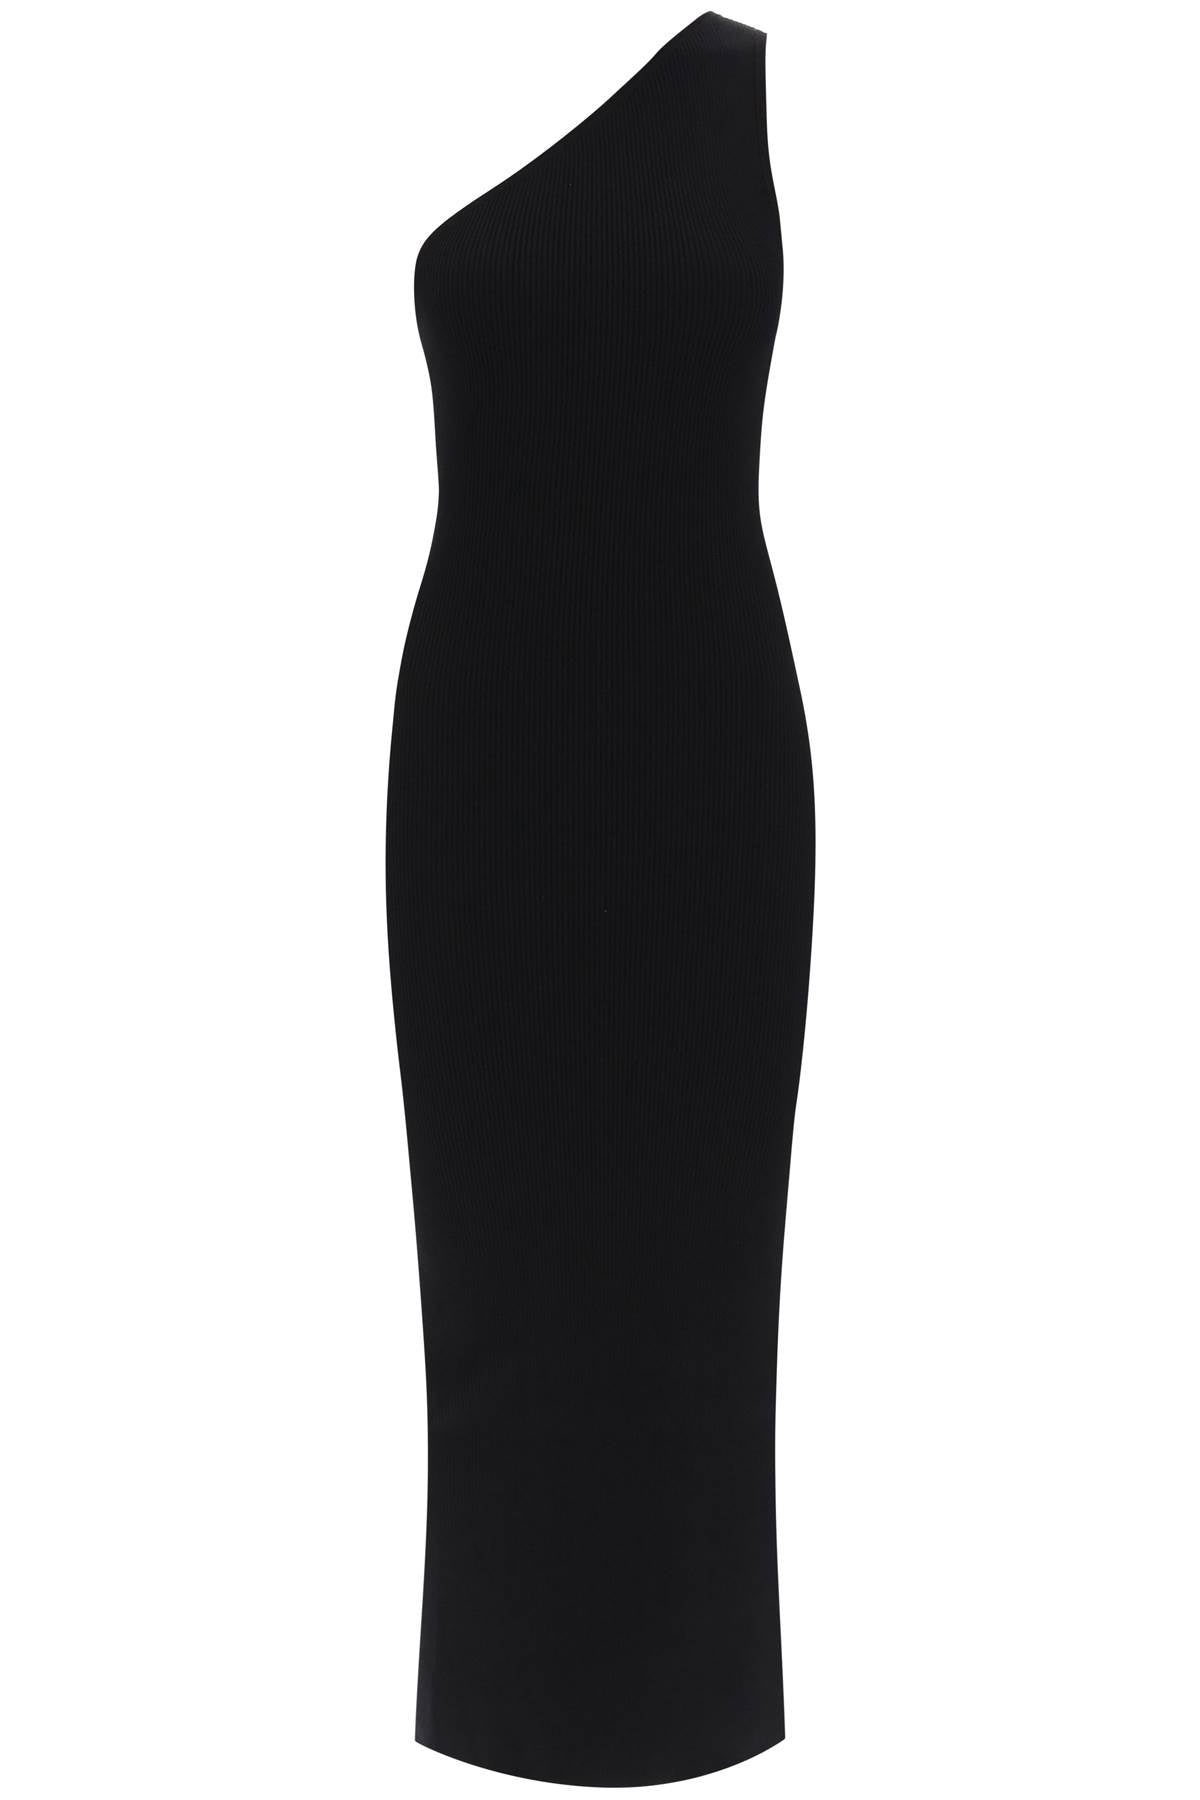 Toteme one-shoulder maxi dress in ribbed knit 233 6042 755 BLACK